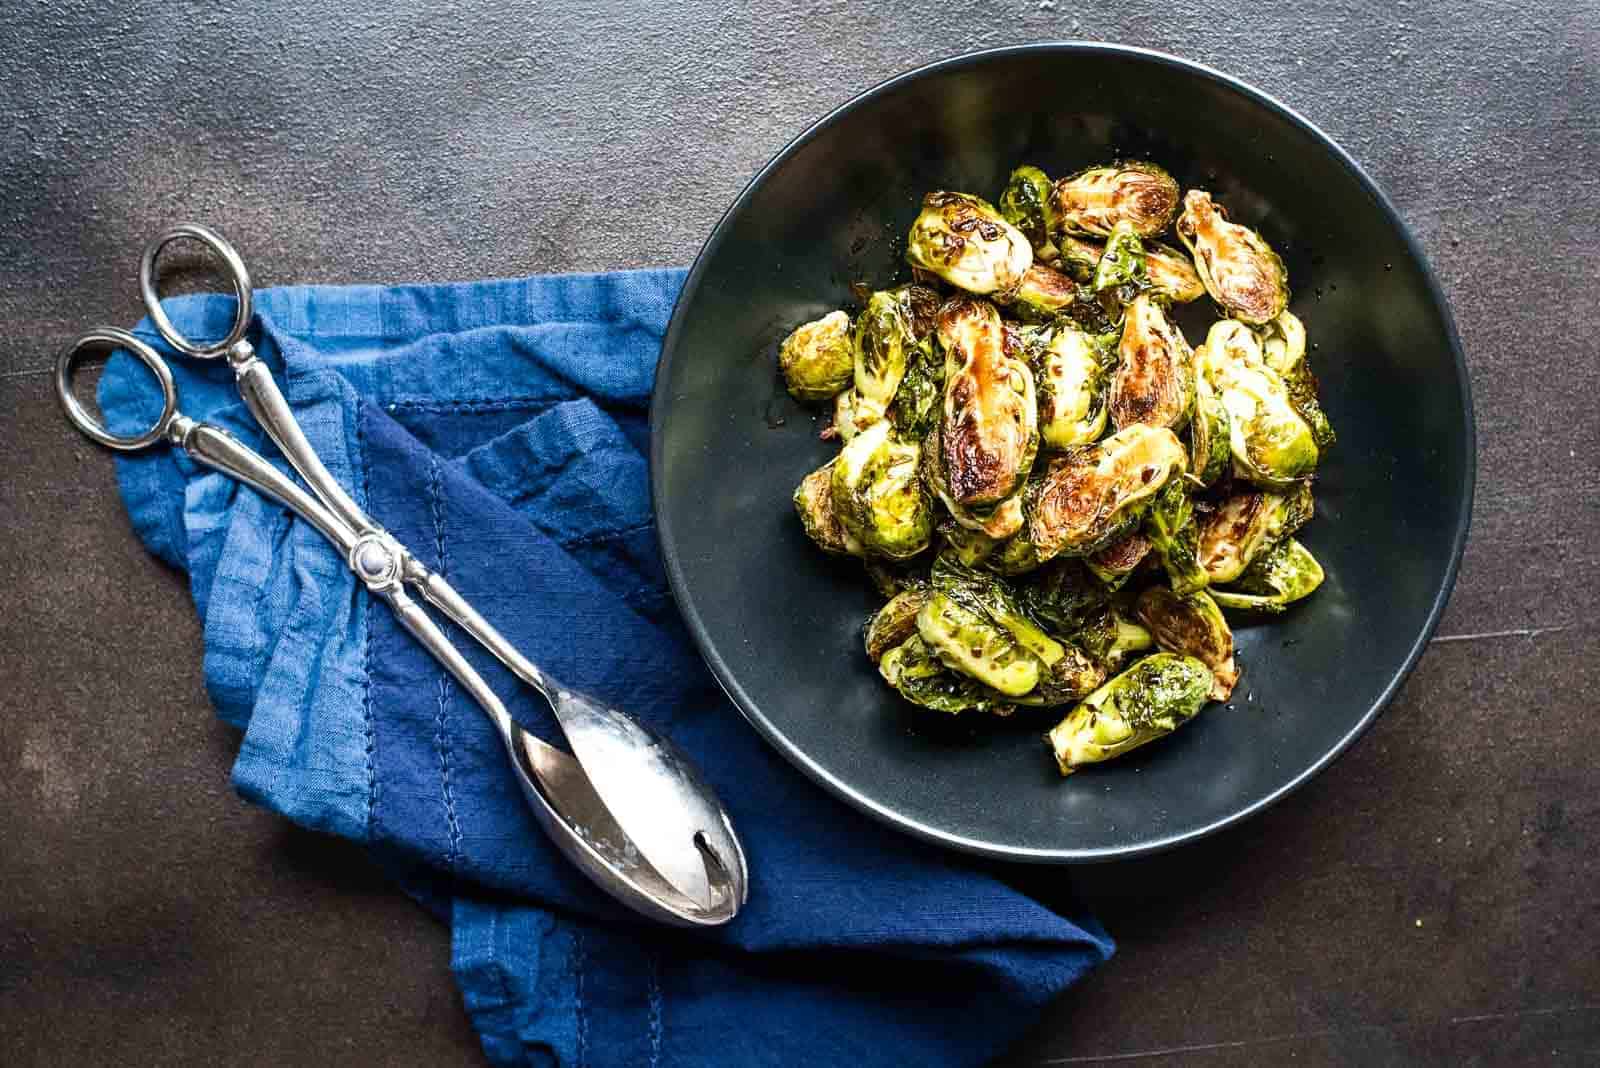 Roasted balsamic glazed brussels sprouts in a black bowl.